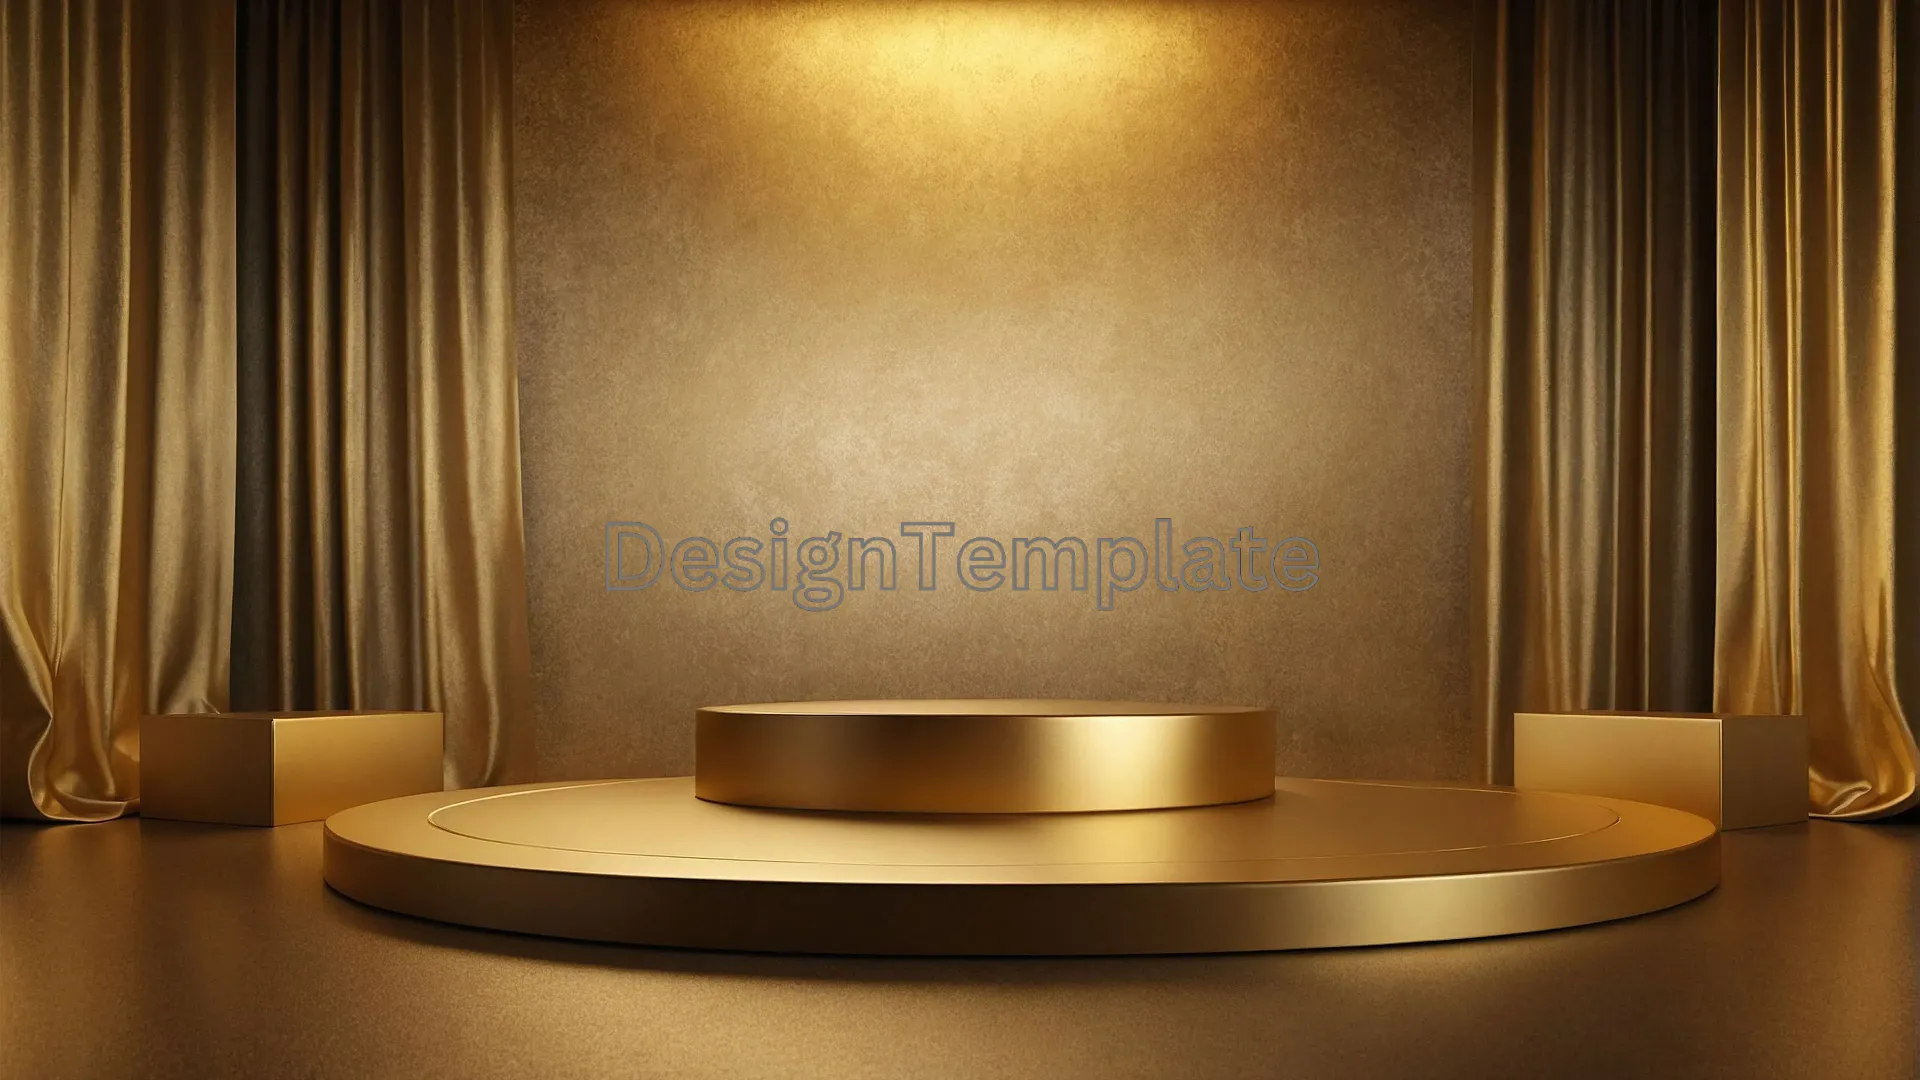 Award Show Golden Podium with Draped Curtains Background